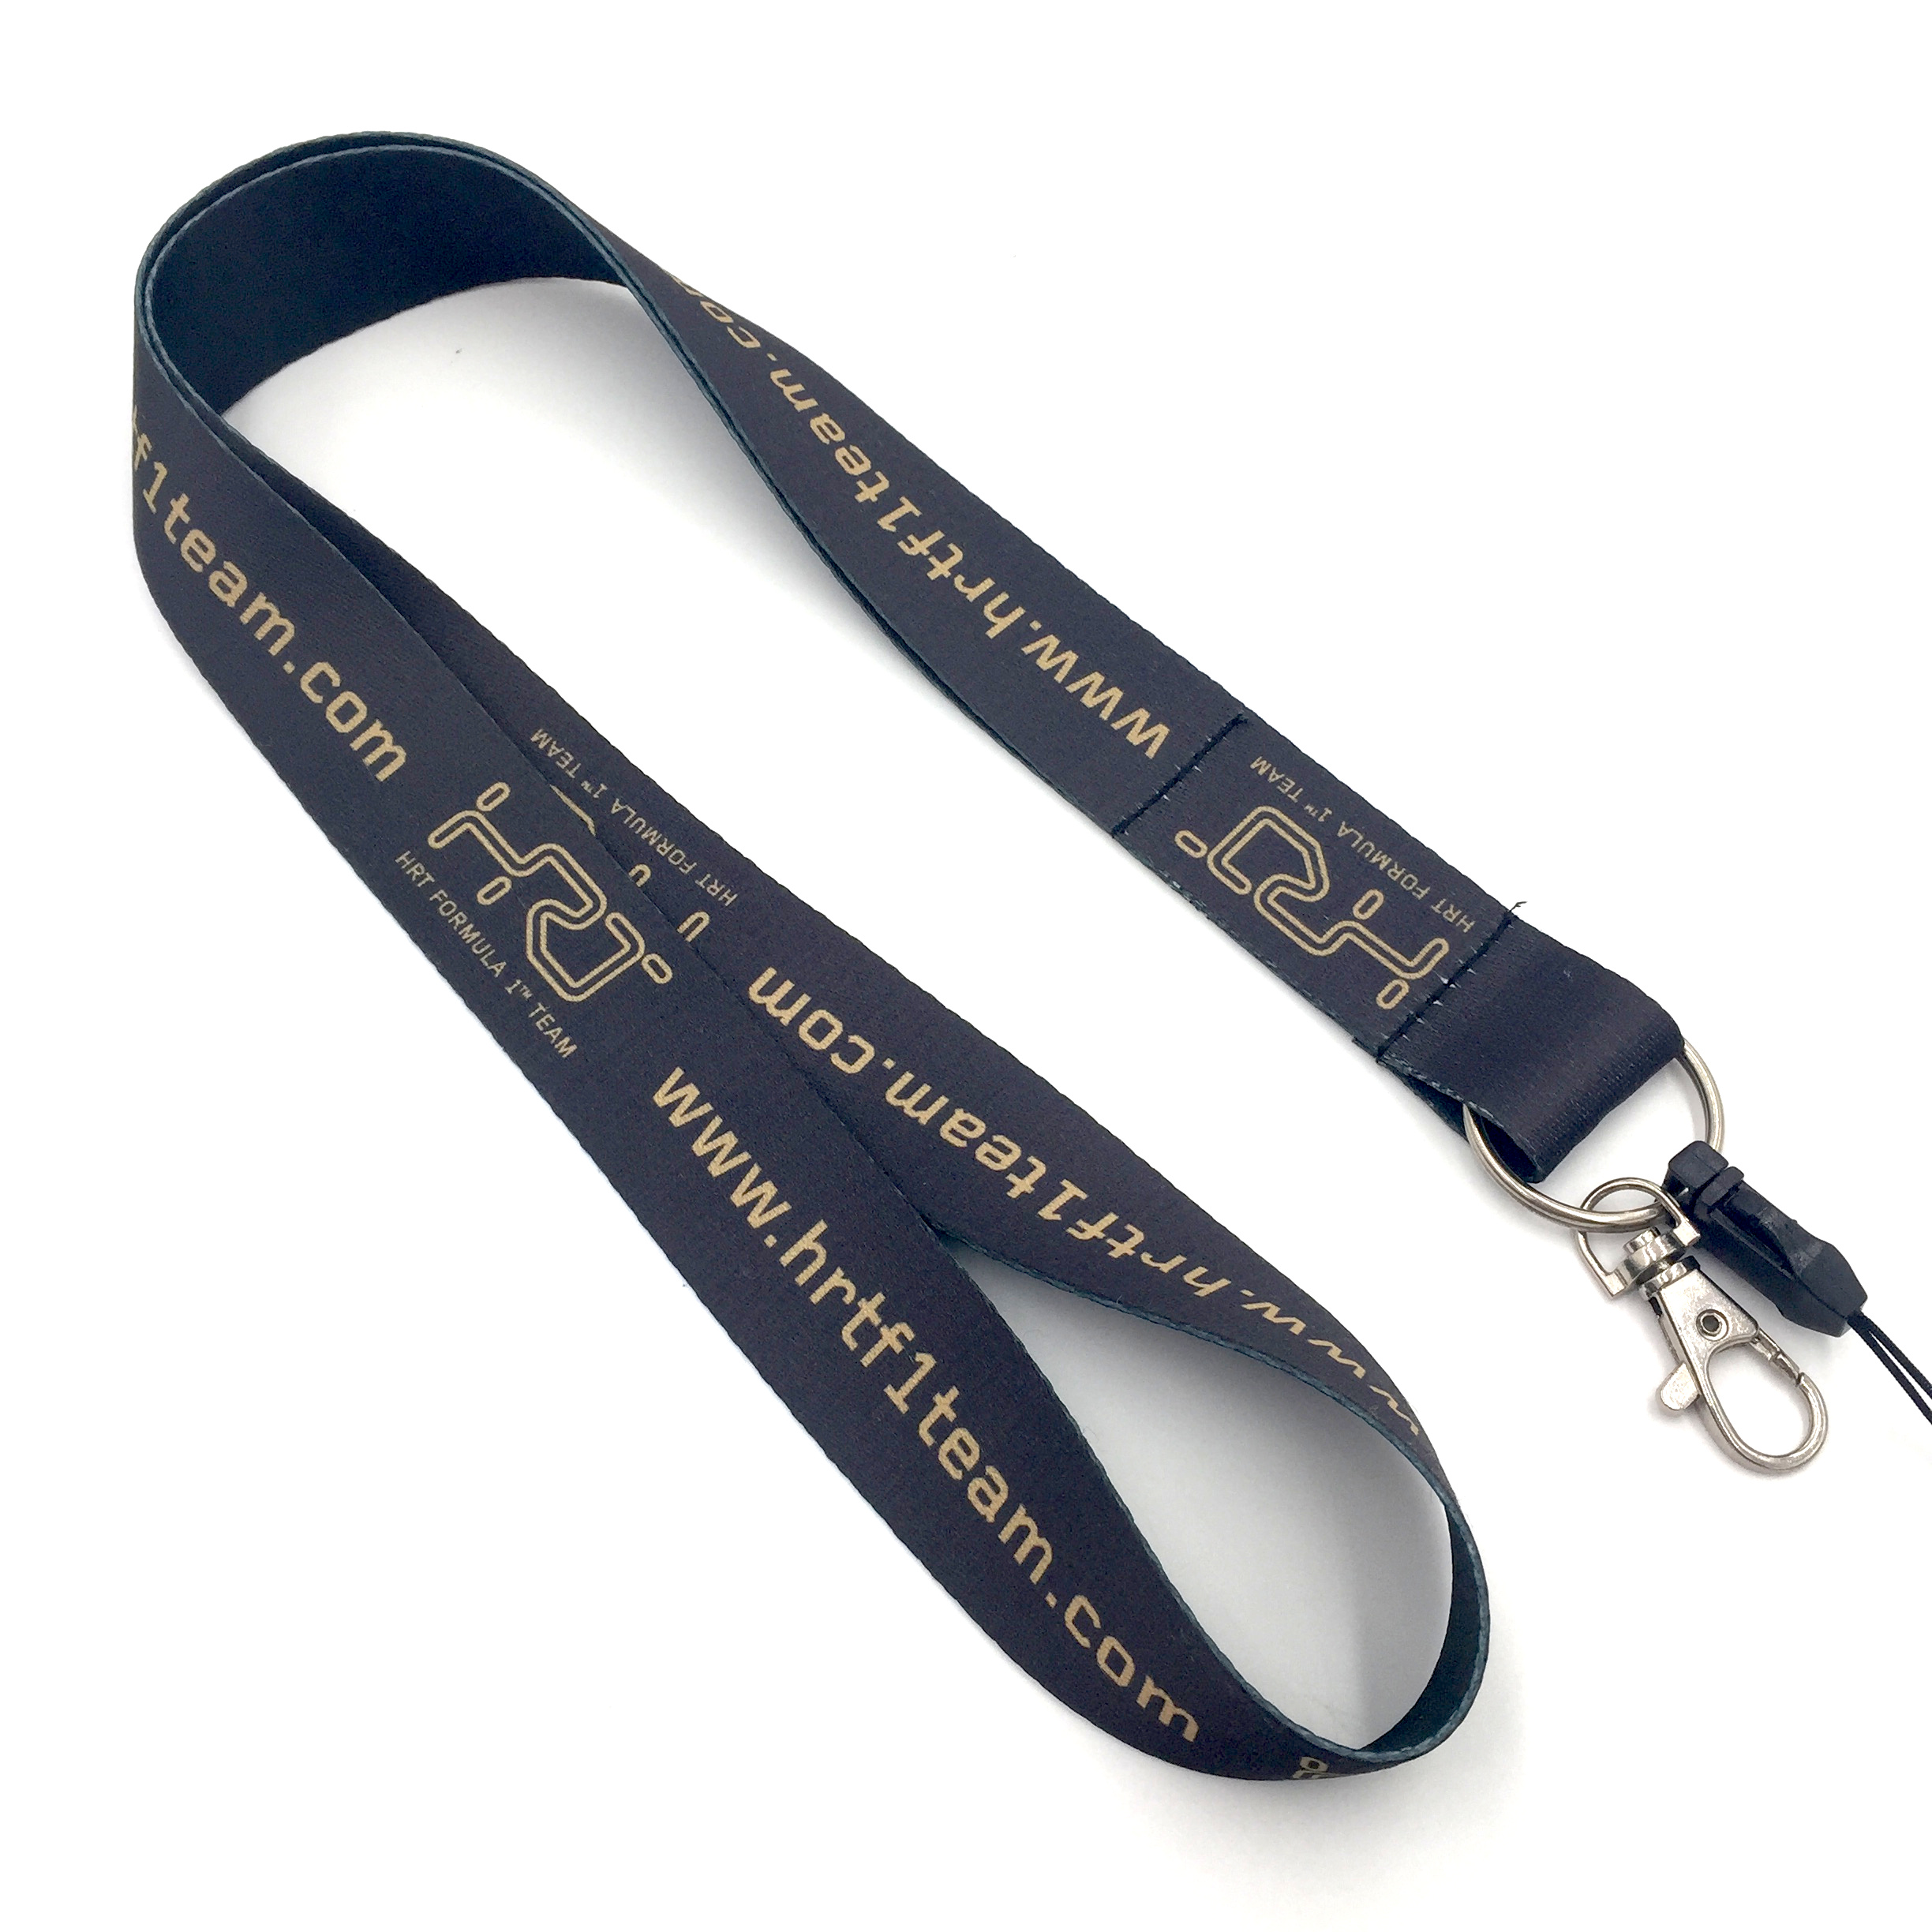 Good Quality Printing Lanyard - black lanyard with custom logo polyester sublimation printed cell phone key id card holder neck clip badge personalized lanyard – Bison